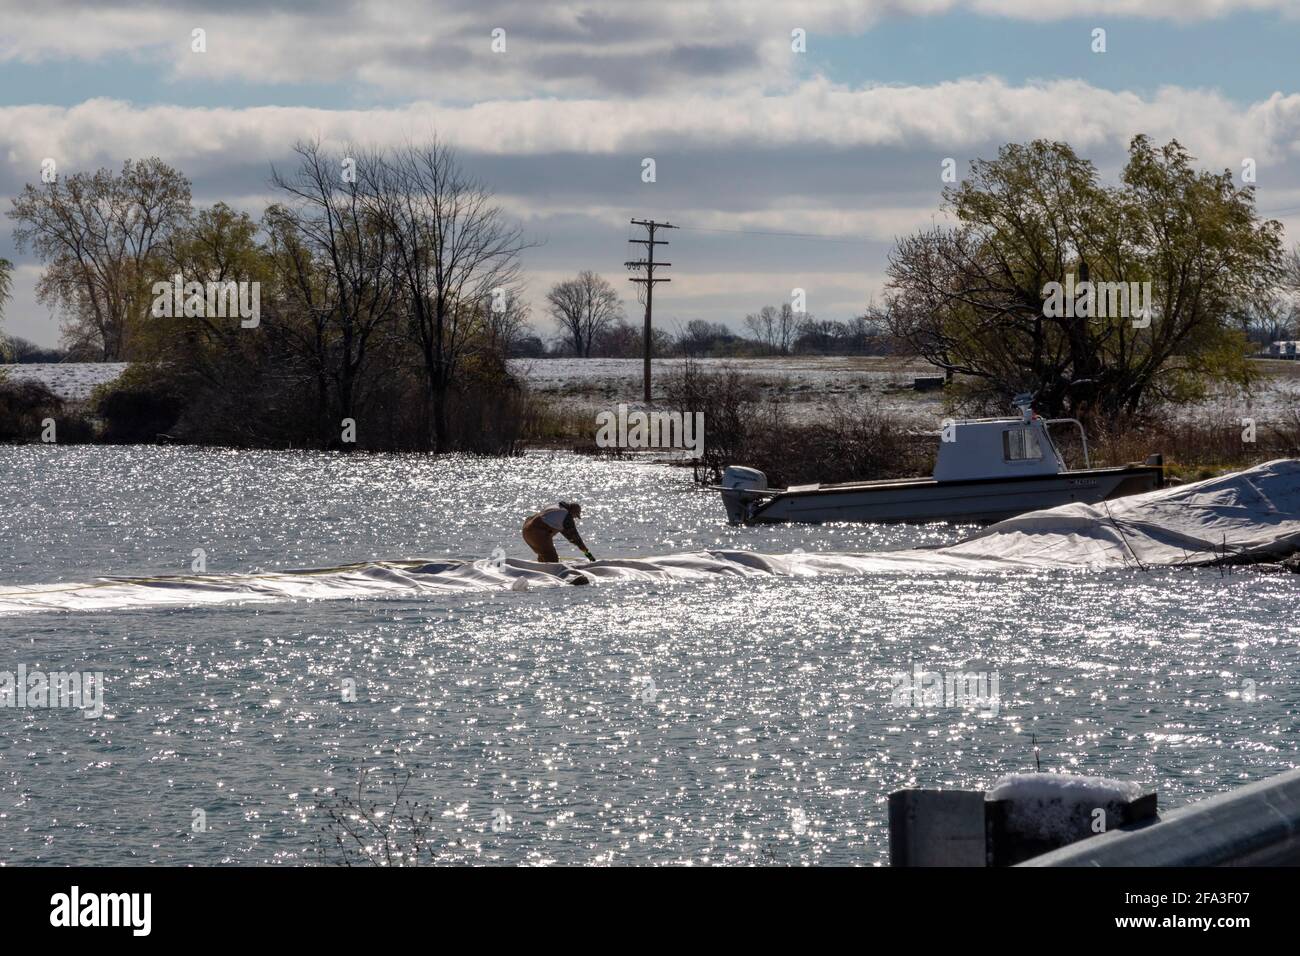 Detroit, Michigan - A worker installs a temporary cofferdam to protect Belle Isle, an island park in the Detroit River, from flooding. High water leve Stock Photo